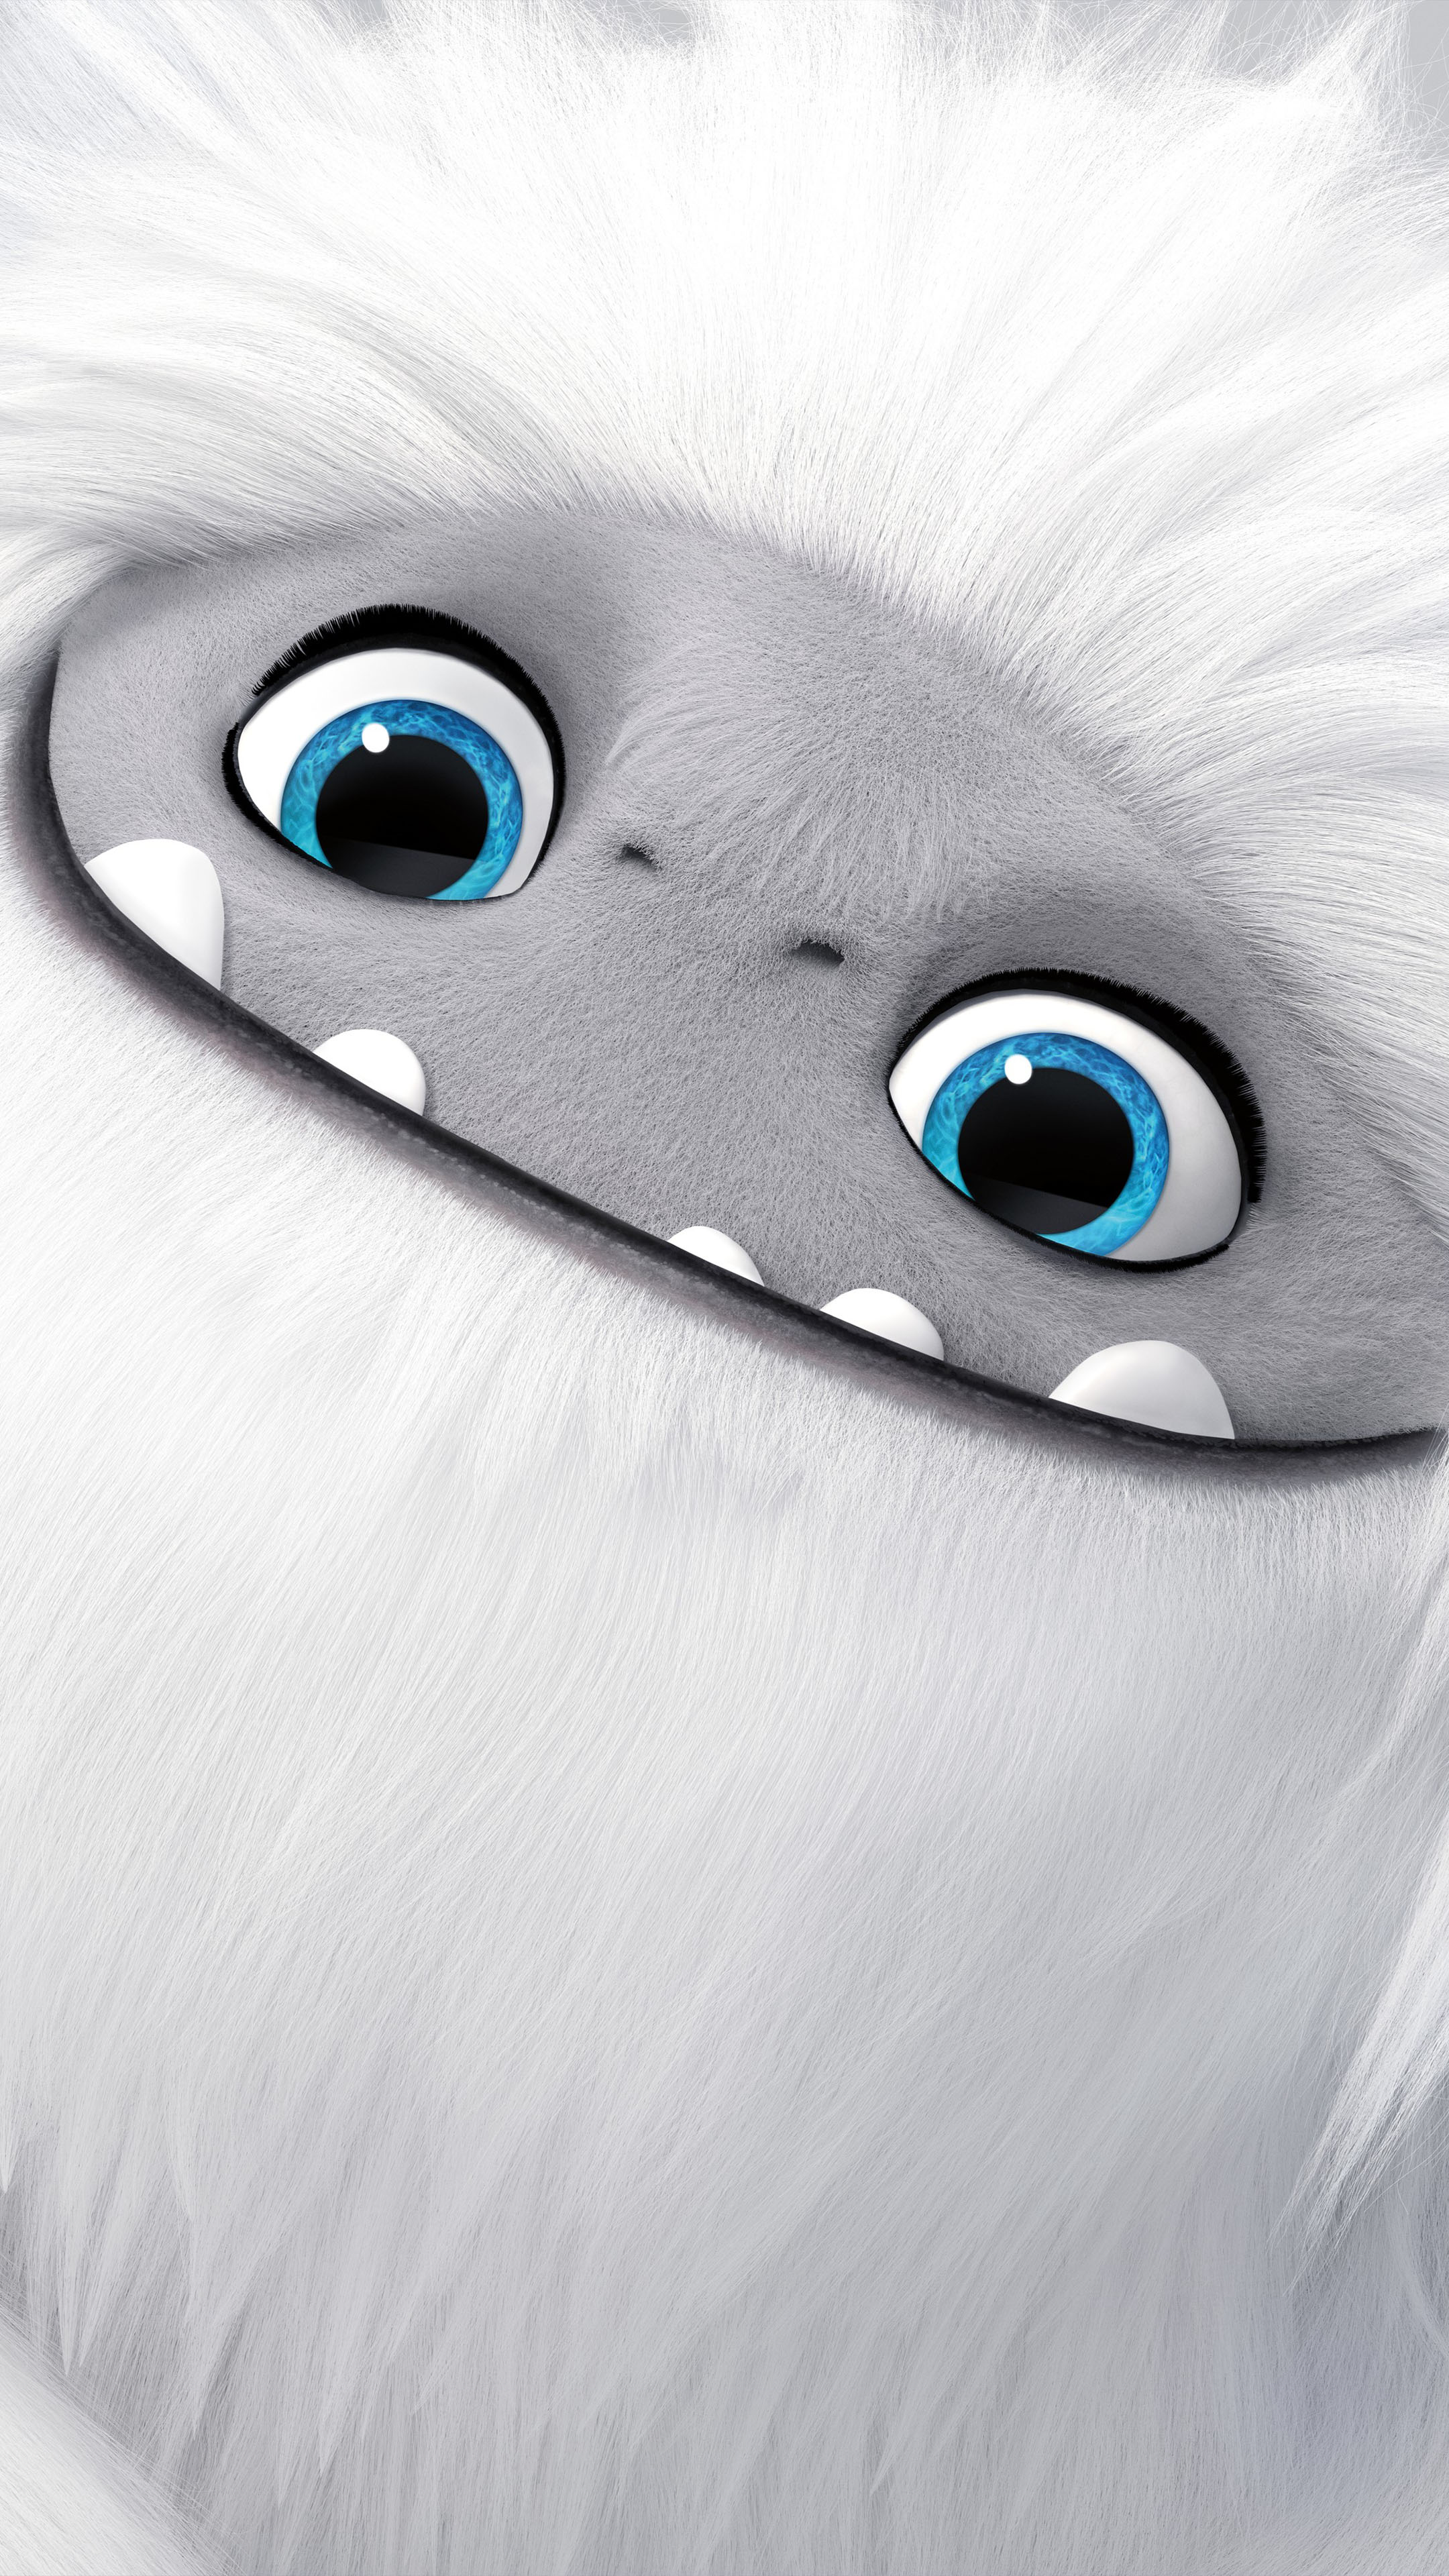 Abominable Animation 2019 4K Ultra HD Mobile Wallpaper